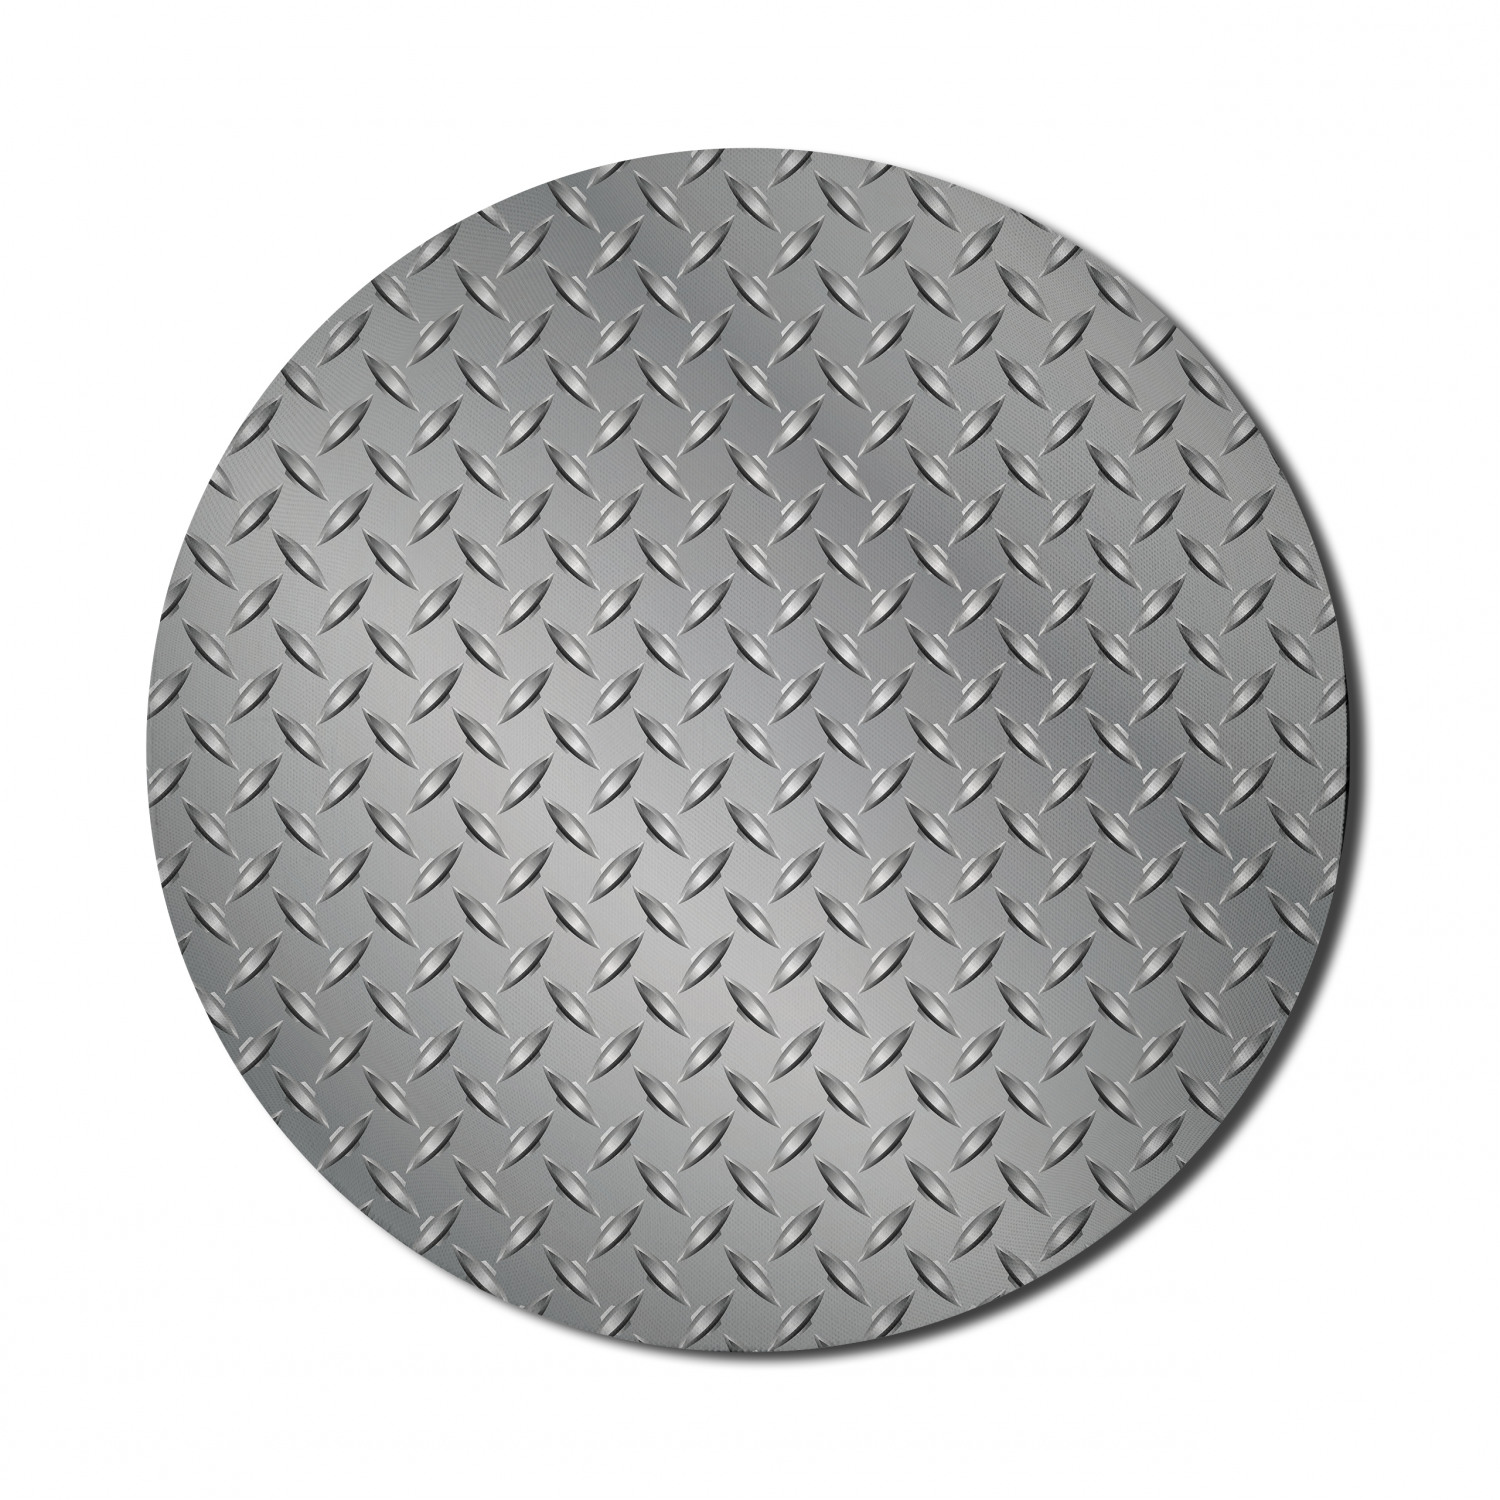 Grey Mouse Pad for Computers, Fence Design Netting Display Diamond Plate Effects Chrome Motif Print Illustration, Round Non-Slip Thick Rubber Modern Gaming Mousepad, 8" Round, Grey, by Ambesonne - image 1 of 2